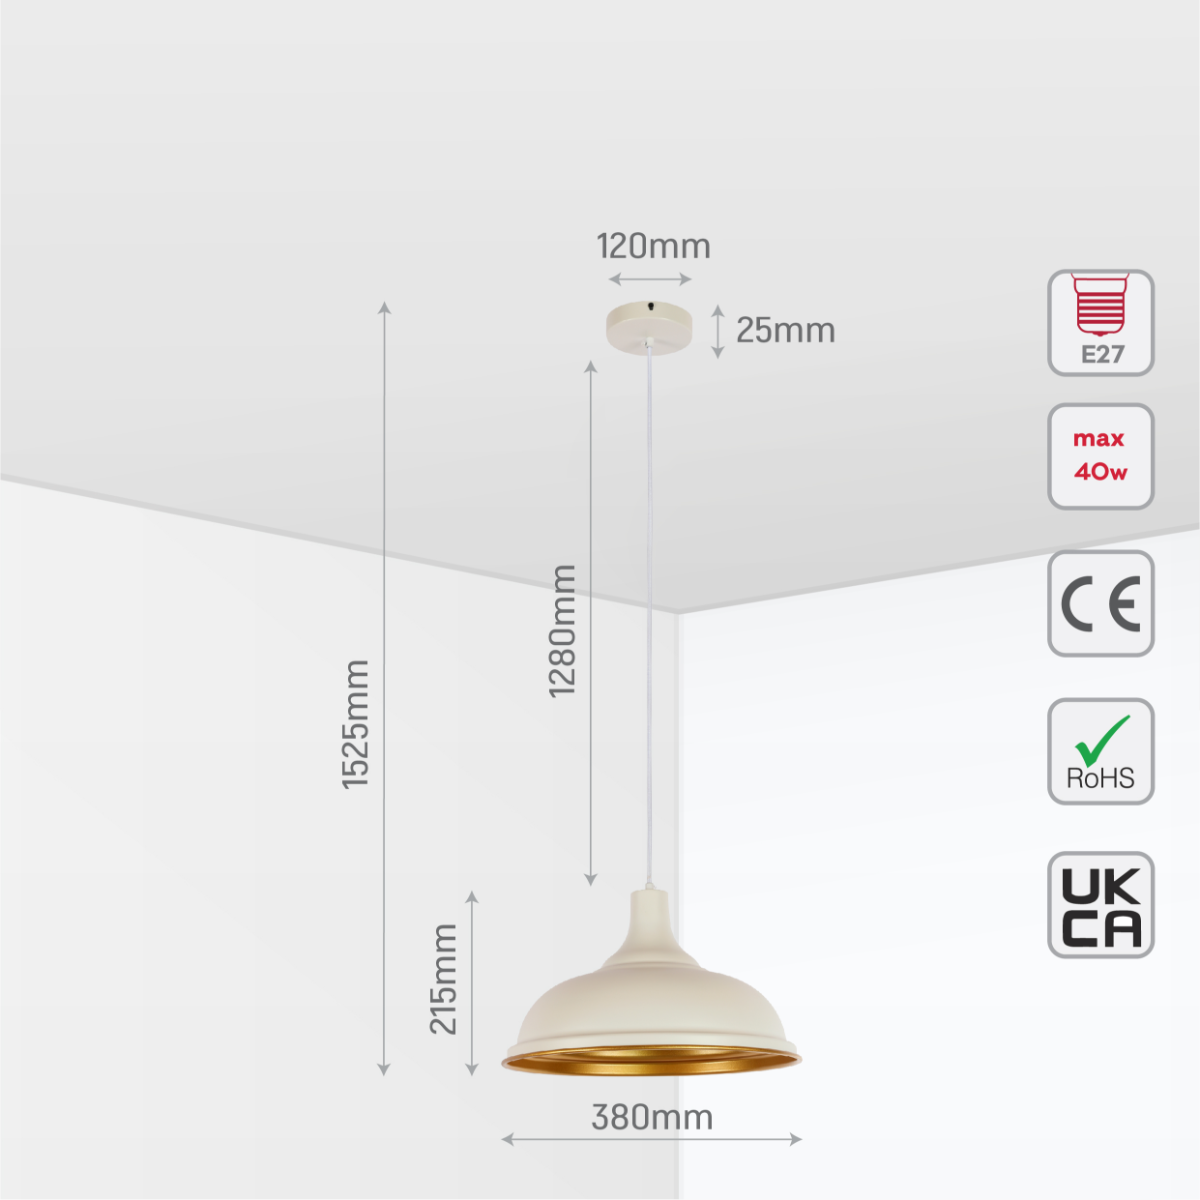 Size and certifications of Modern Step Pendant Light - 38cm Metal Shade in Varied Hues 150-19058